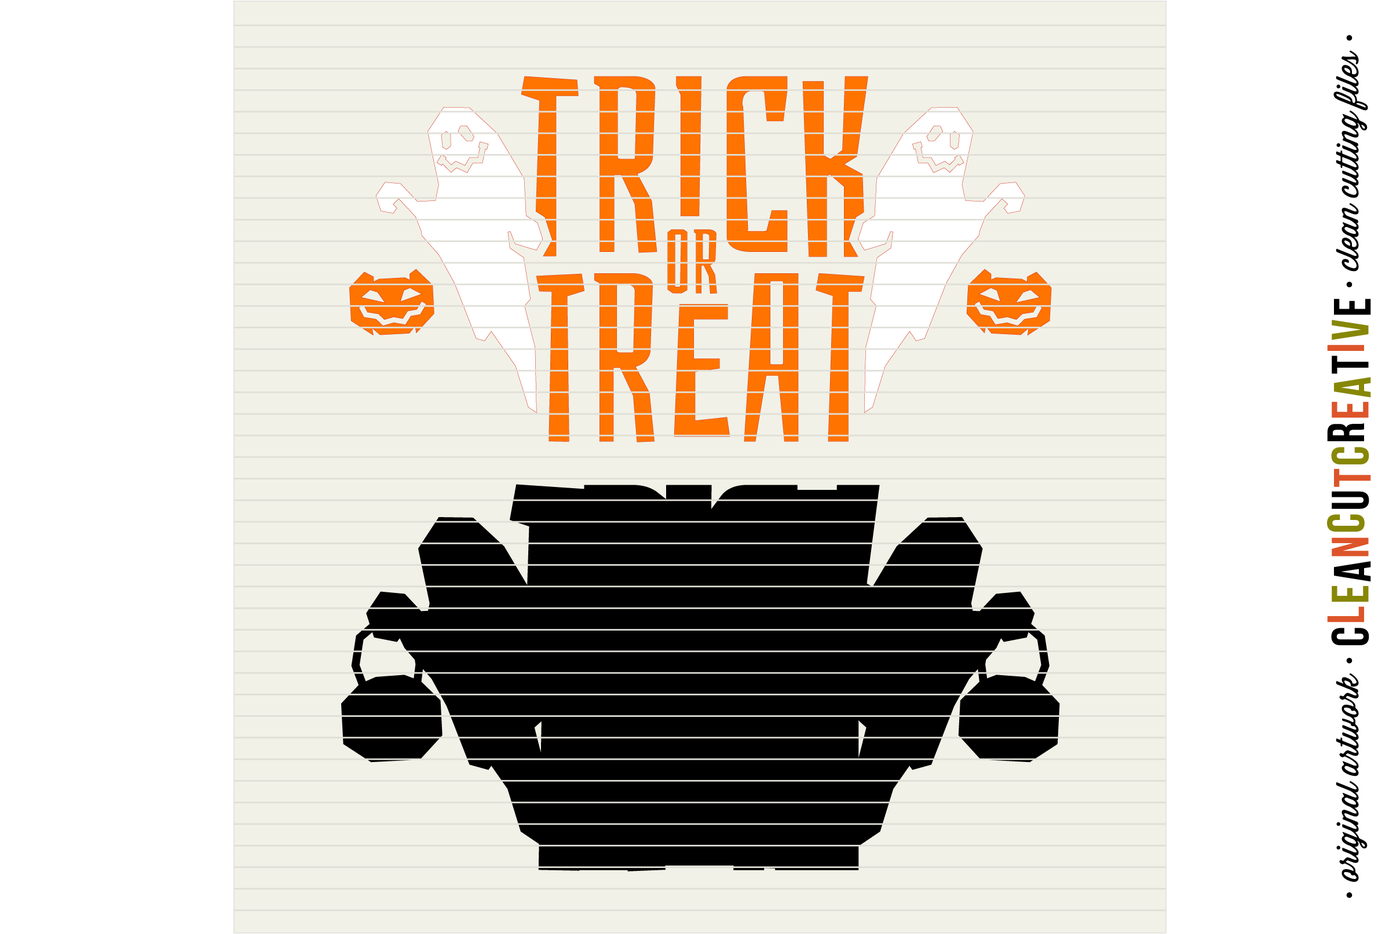 Svg Trick Or Treat Svg Halloween Svg Ghost Spooky Halloween Door Sign Svg Svg Dxf Eps Png Cricut Silhouette Clean Cutting Files By Cleancutcreative Thehungryjpeg Com